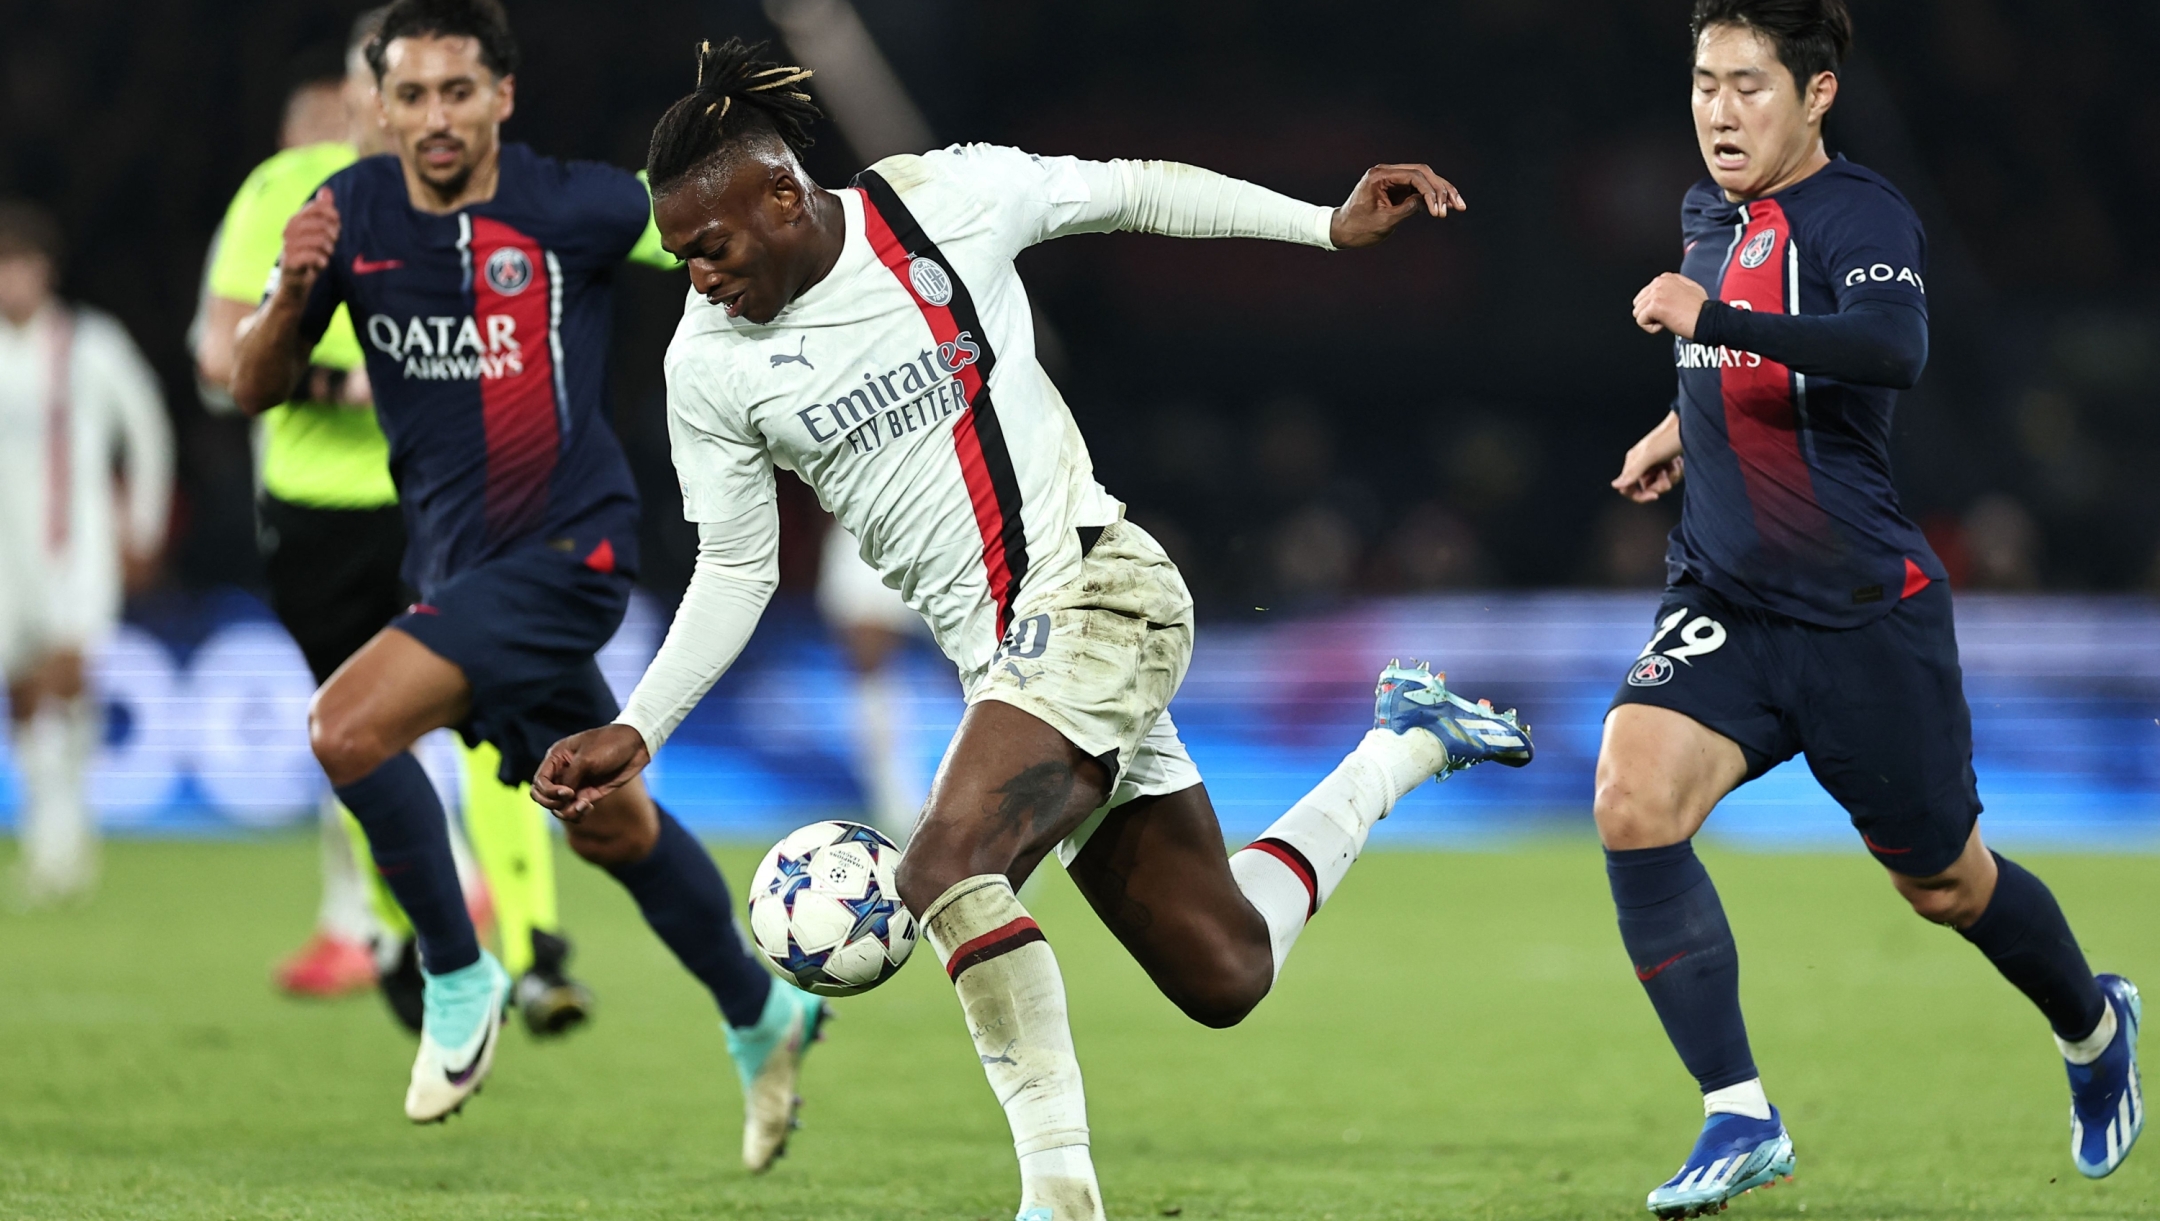 AC Milan's Portuguese forward #10 Rafael Leao fights for the ball with Paris Saint-Germain's Brazilian defender #05 Marquinhos (L) and Paris Saint-Germain's South Korean midfielder #19 Lee Kang-in during the UEFA Champions League Group F football match between Paris Saint-Germain (PSG) and AC Milan at the Parc de Princes in Paris on October 25, 2023. (Photo by FRANCK FIFE / AFP)